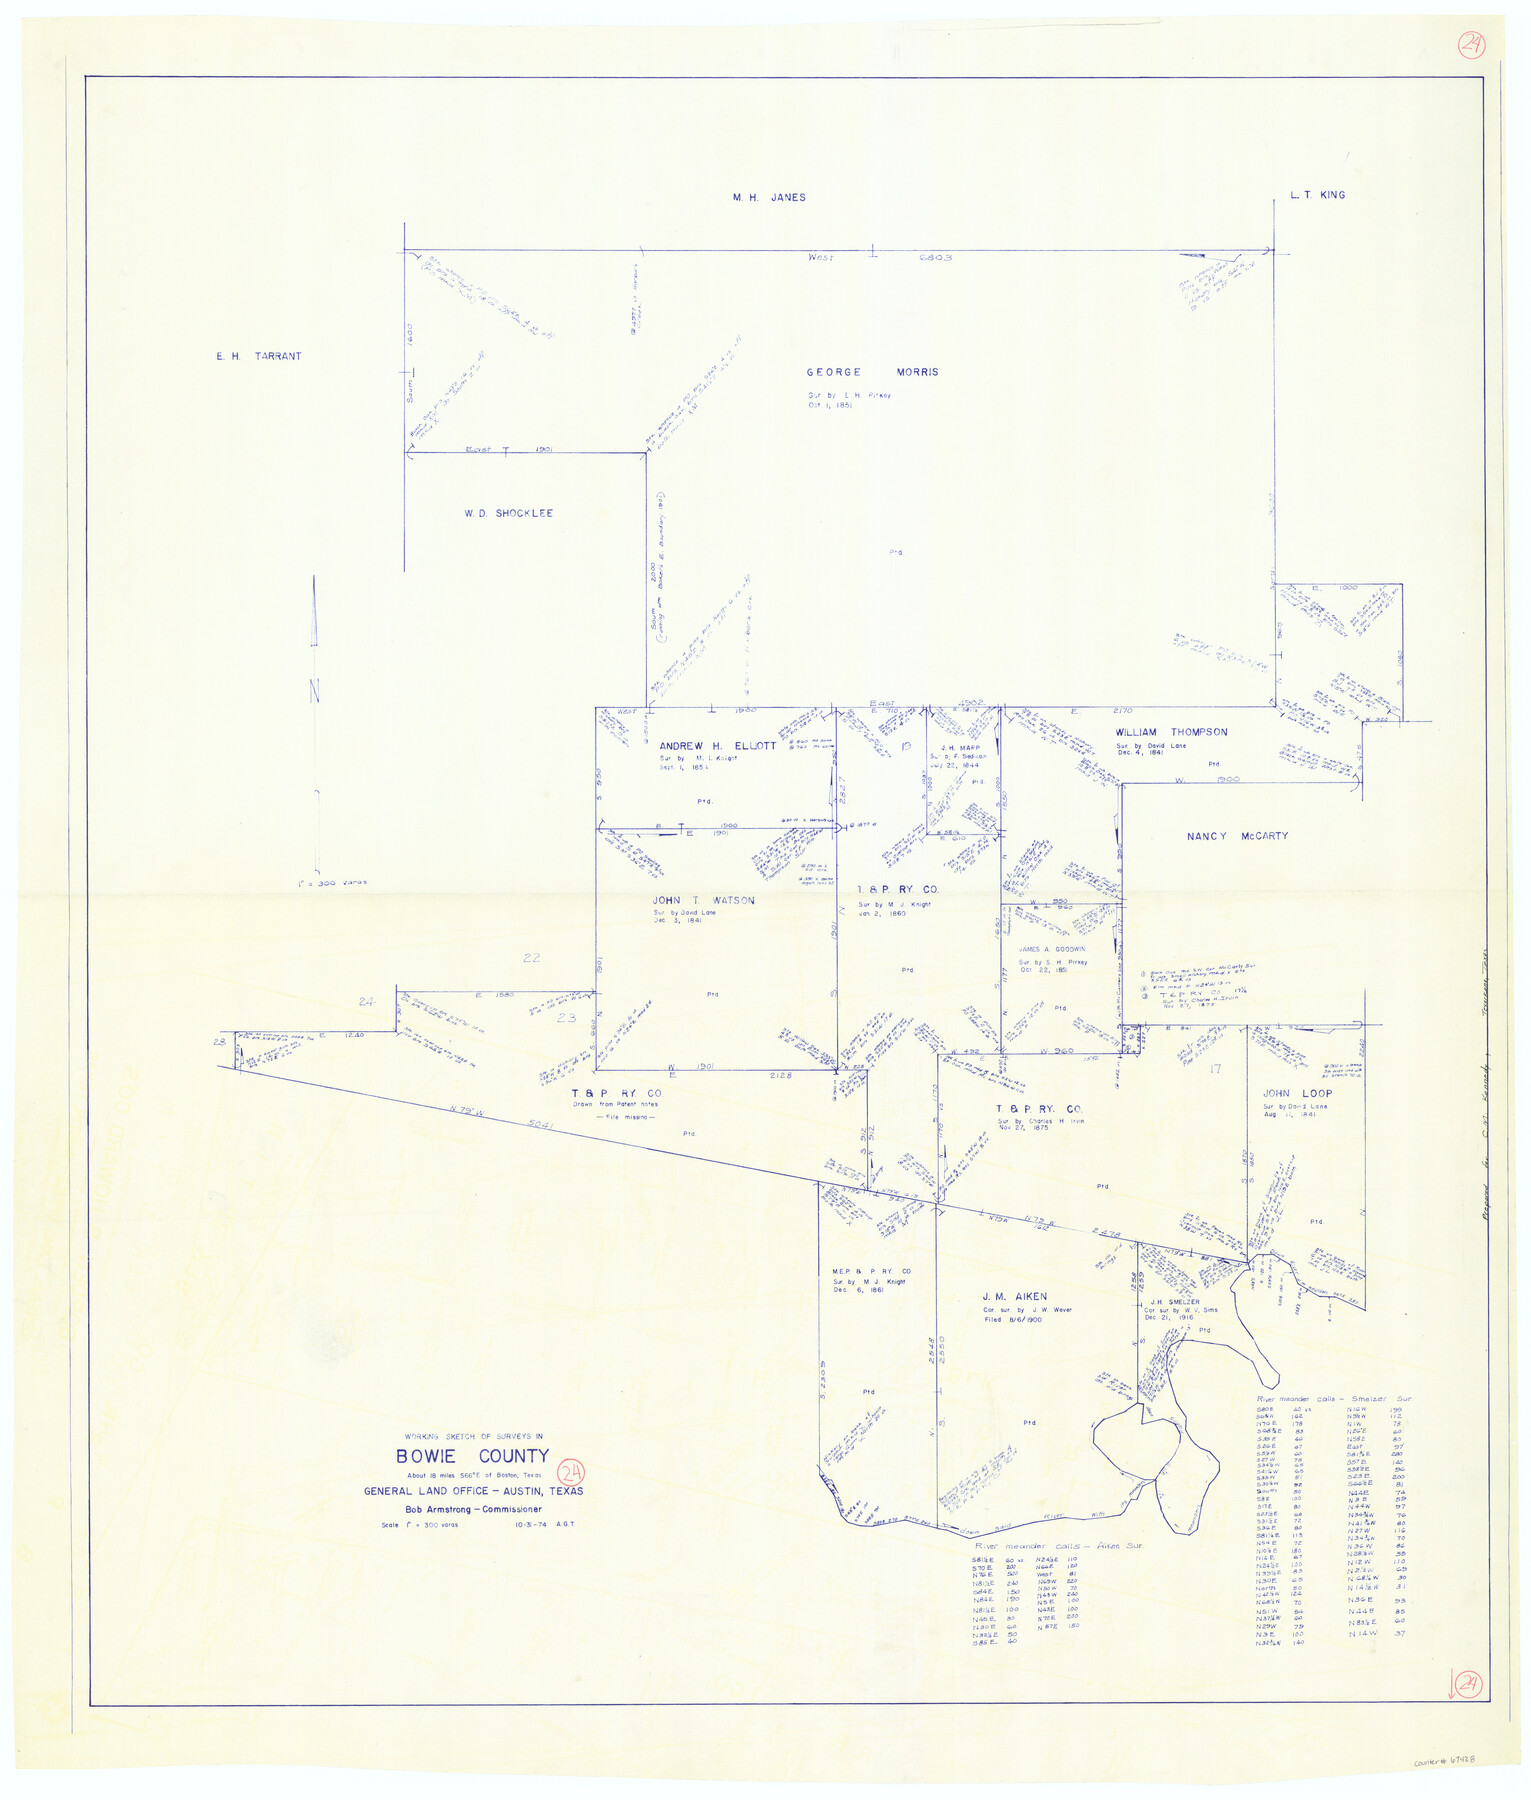 67428, Bowie County Working Sketch 24, General Map Collection